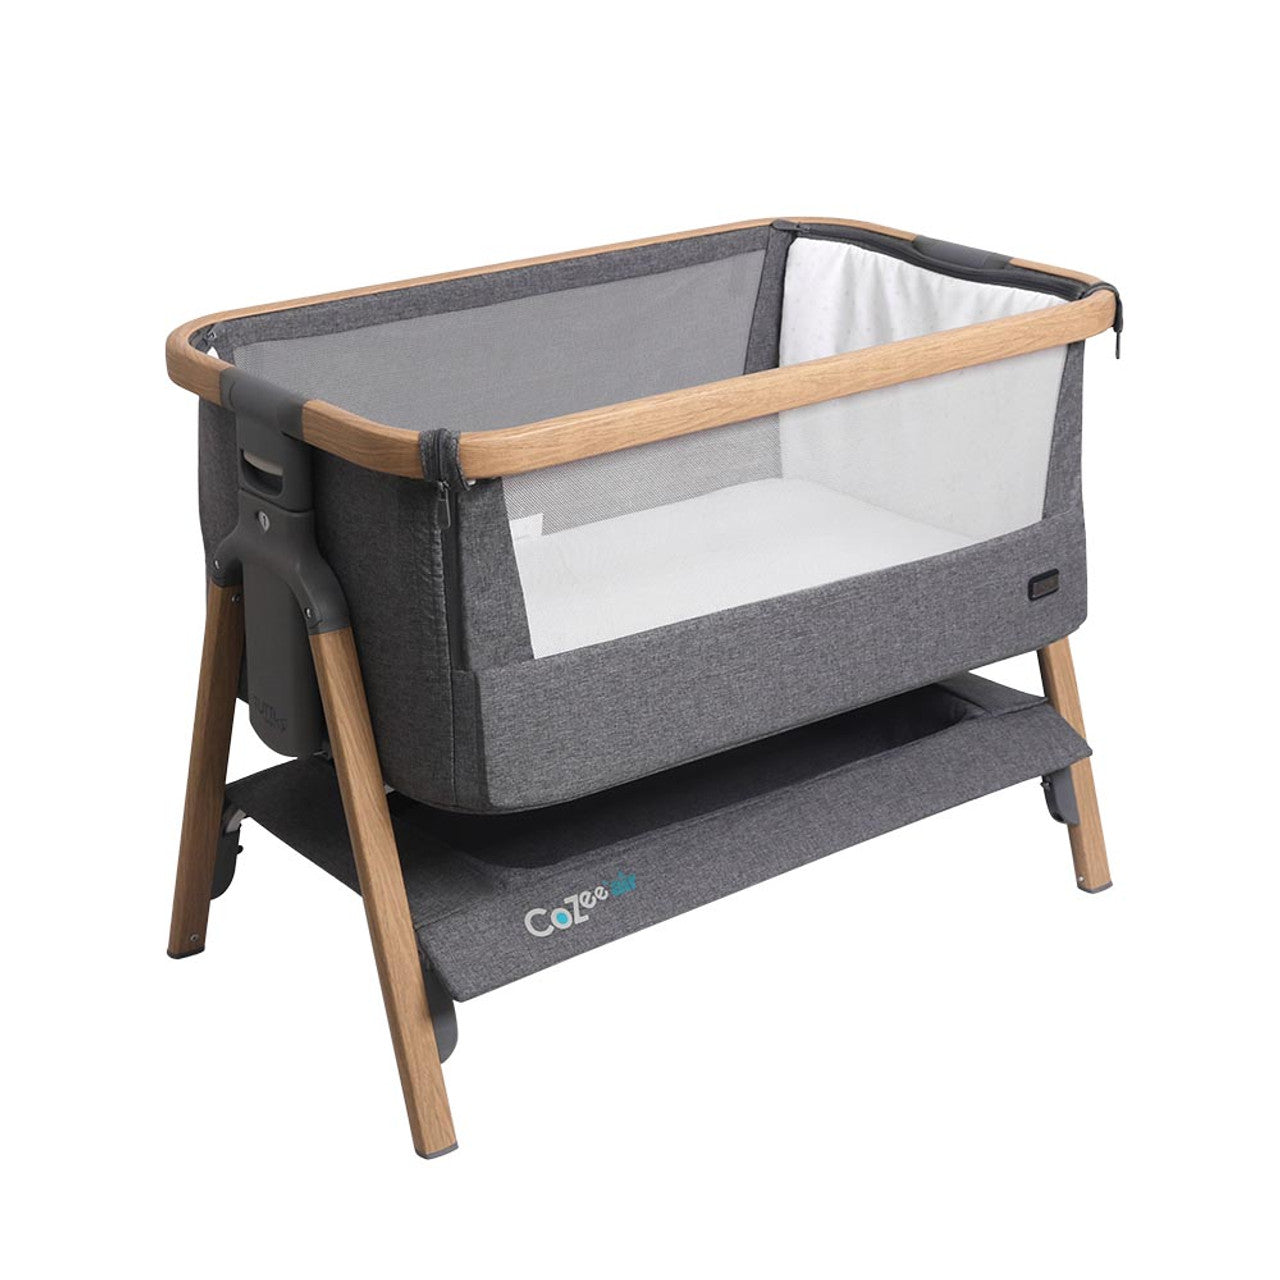 Tutti Bambini CoZee Air Bedside Crib - Oak and Charcoal - For Your Little One